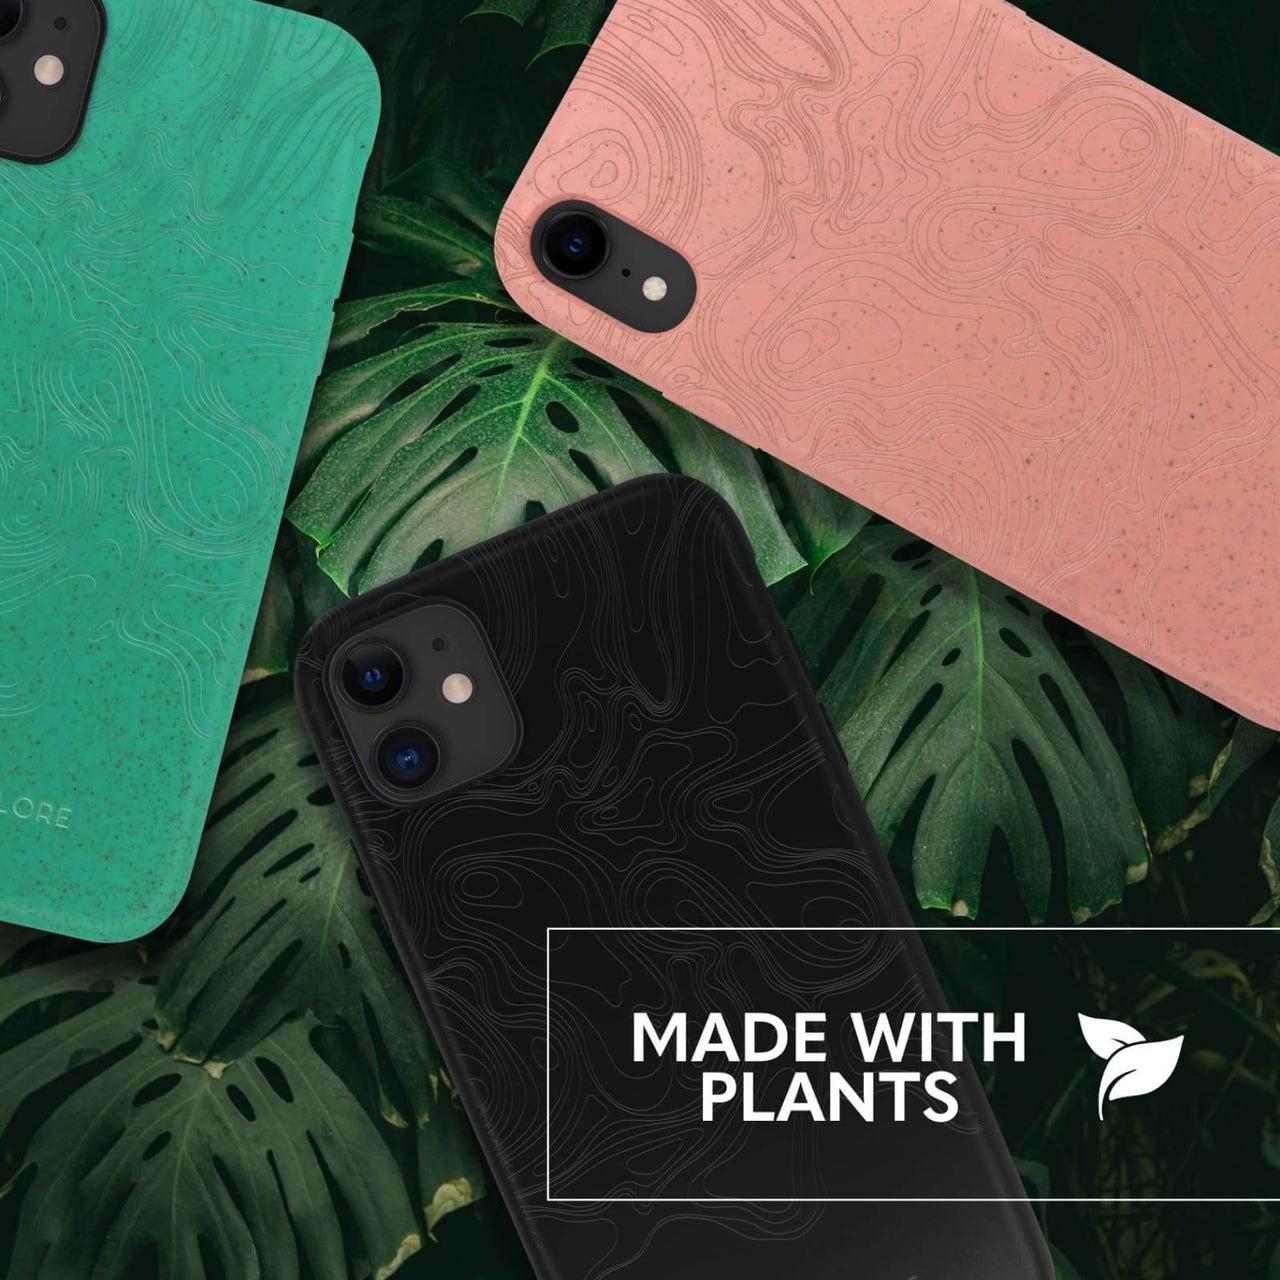 Eco Friendly iPhone X / XS Case Compostable & Biodegradable - Loam & Lore